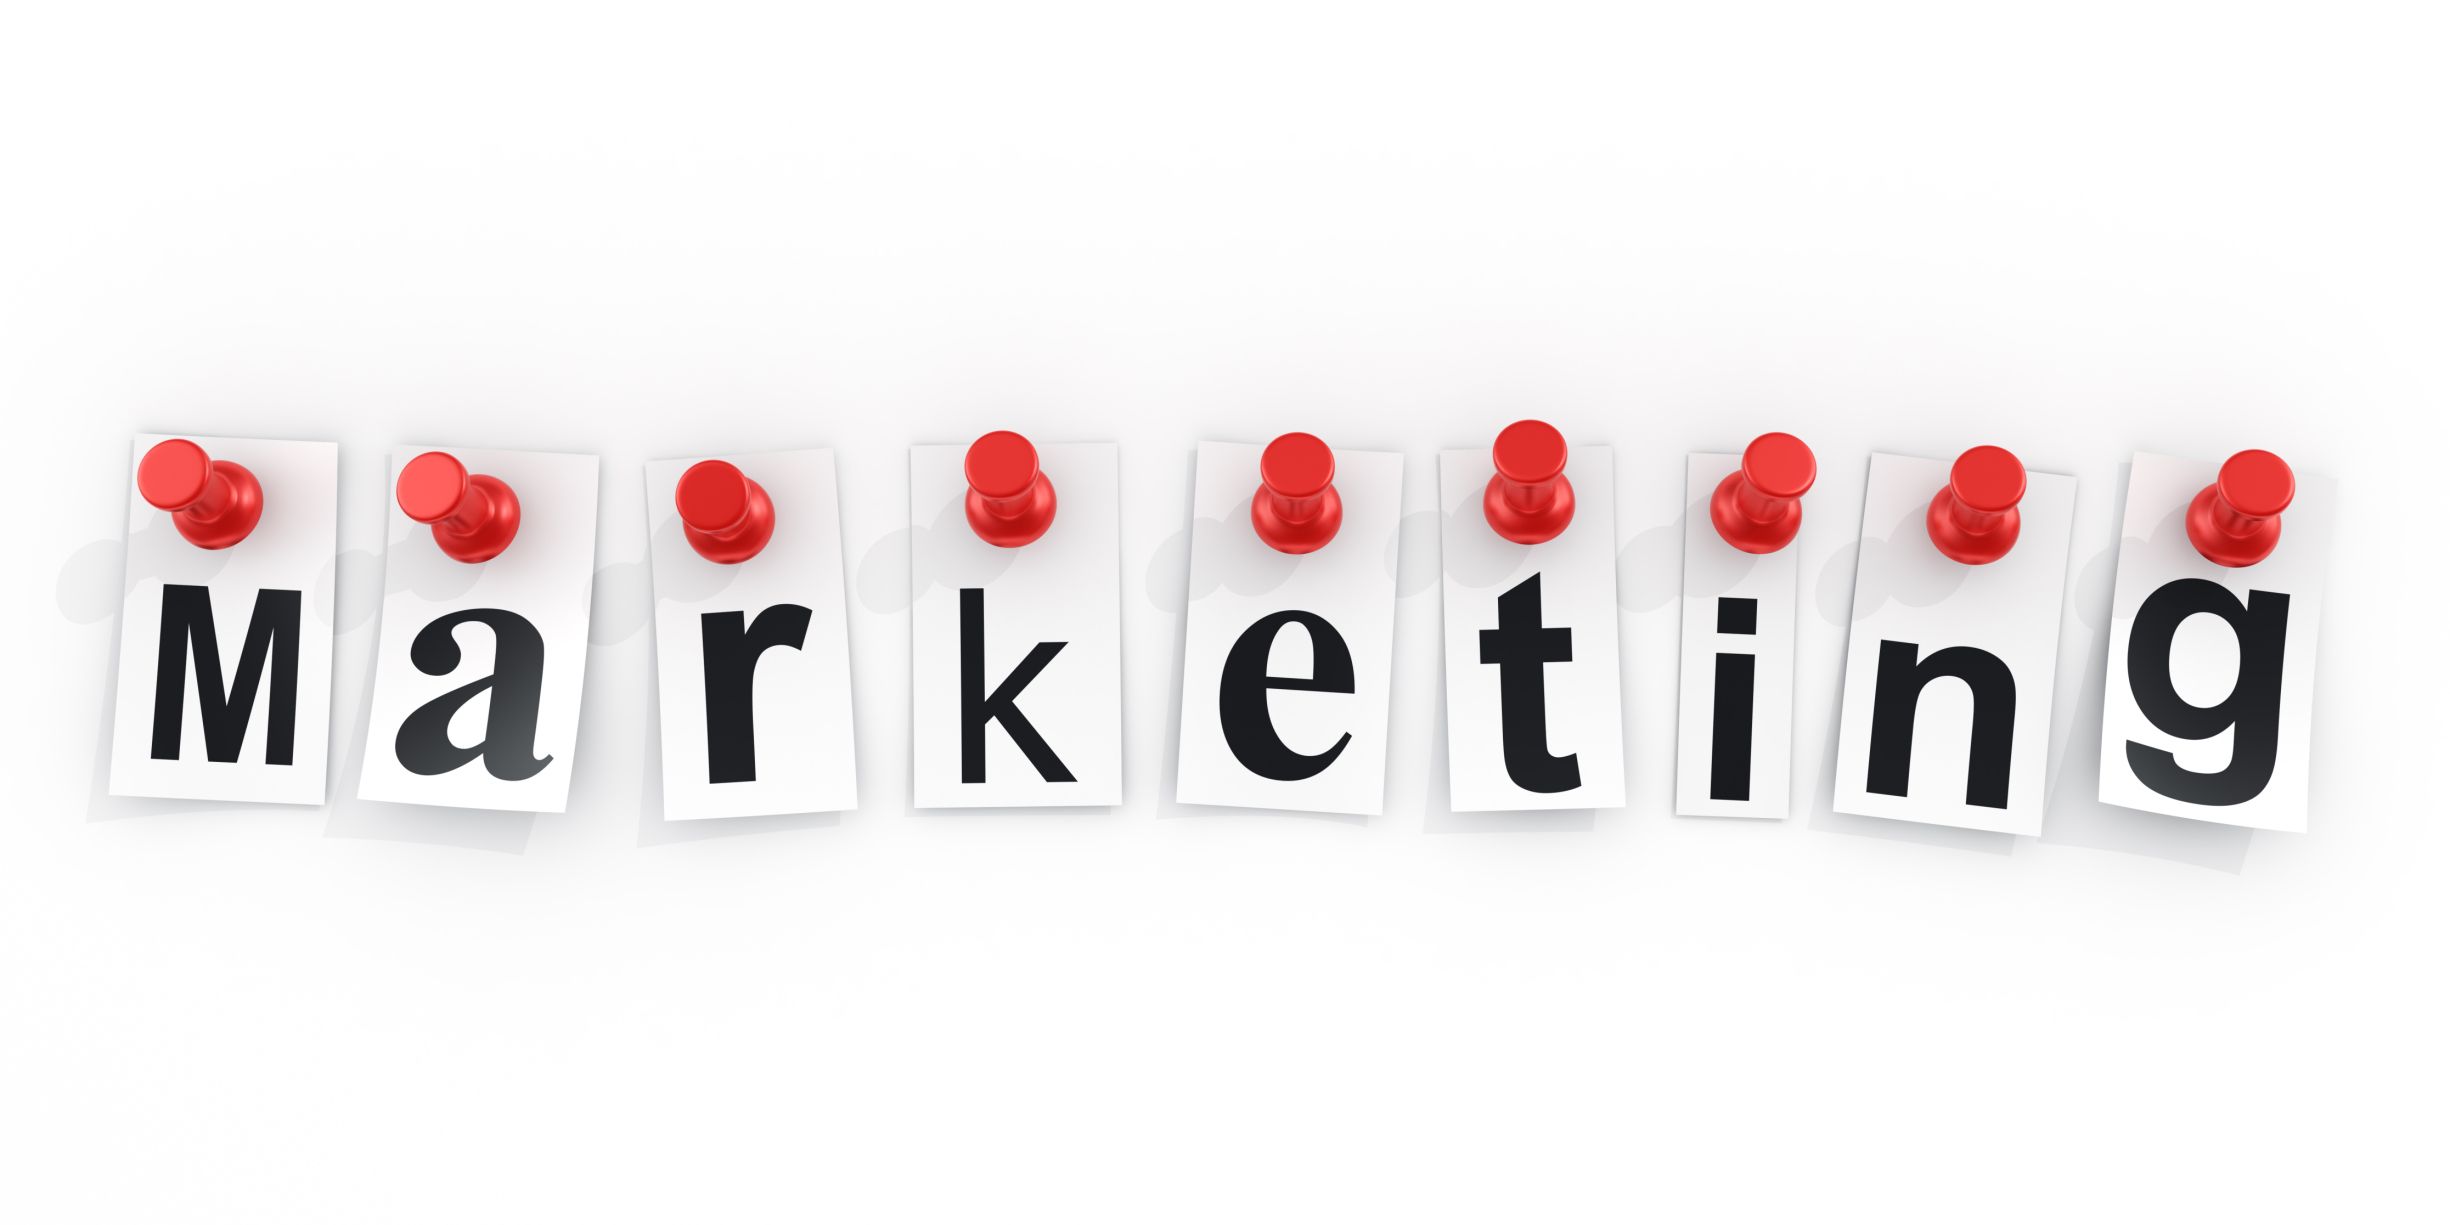 The importance of investing in marketing